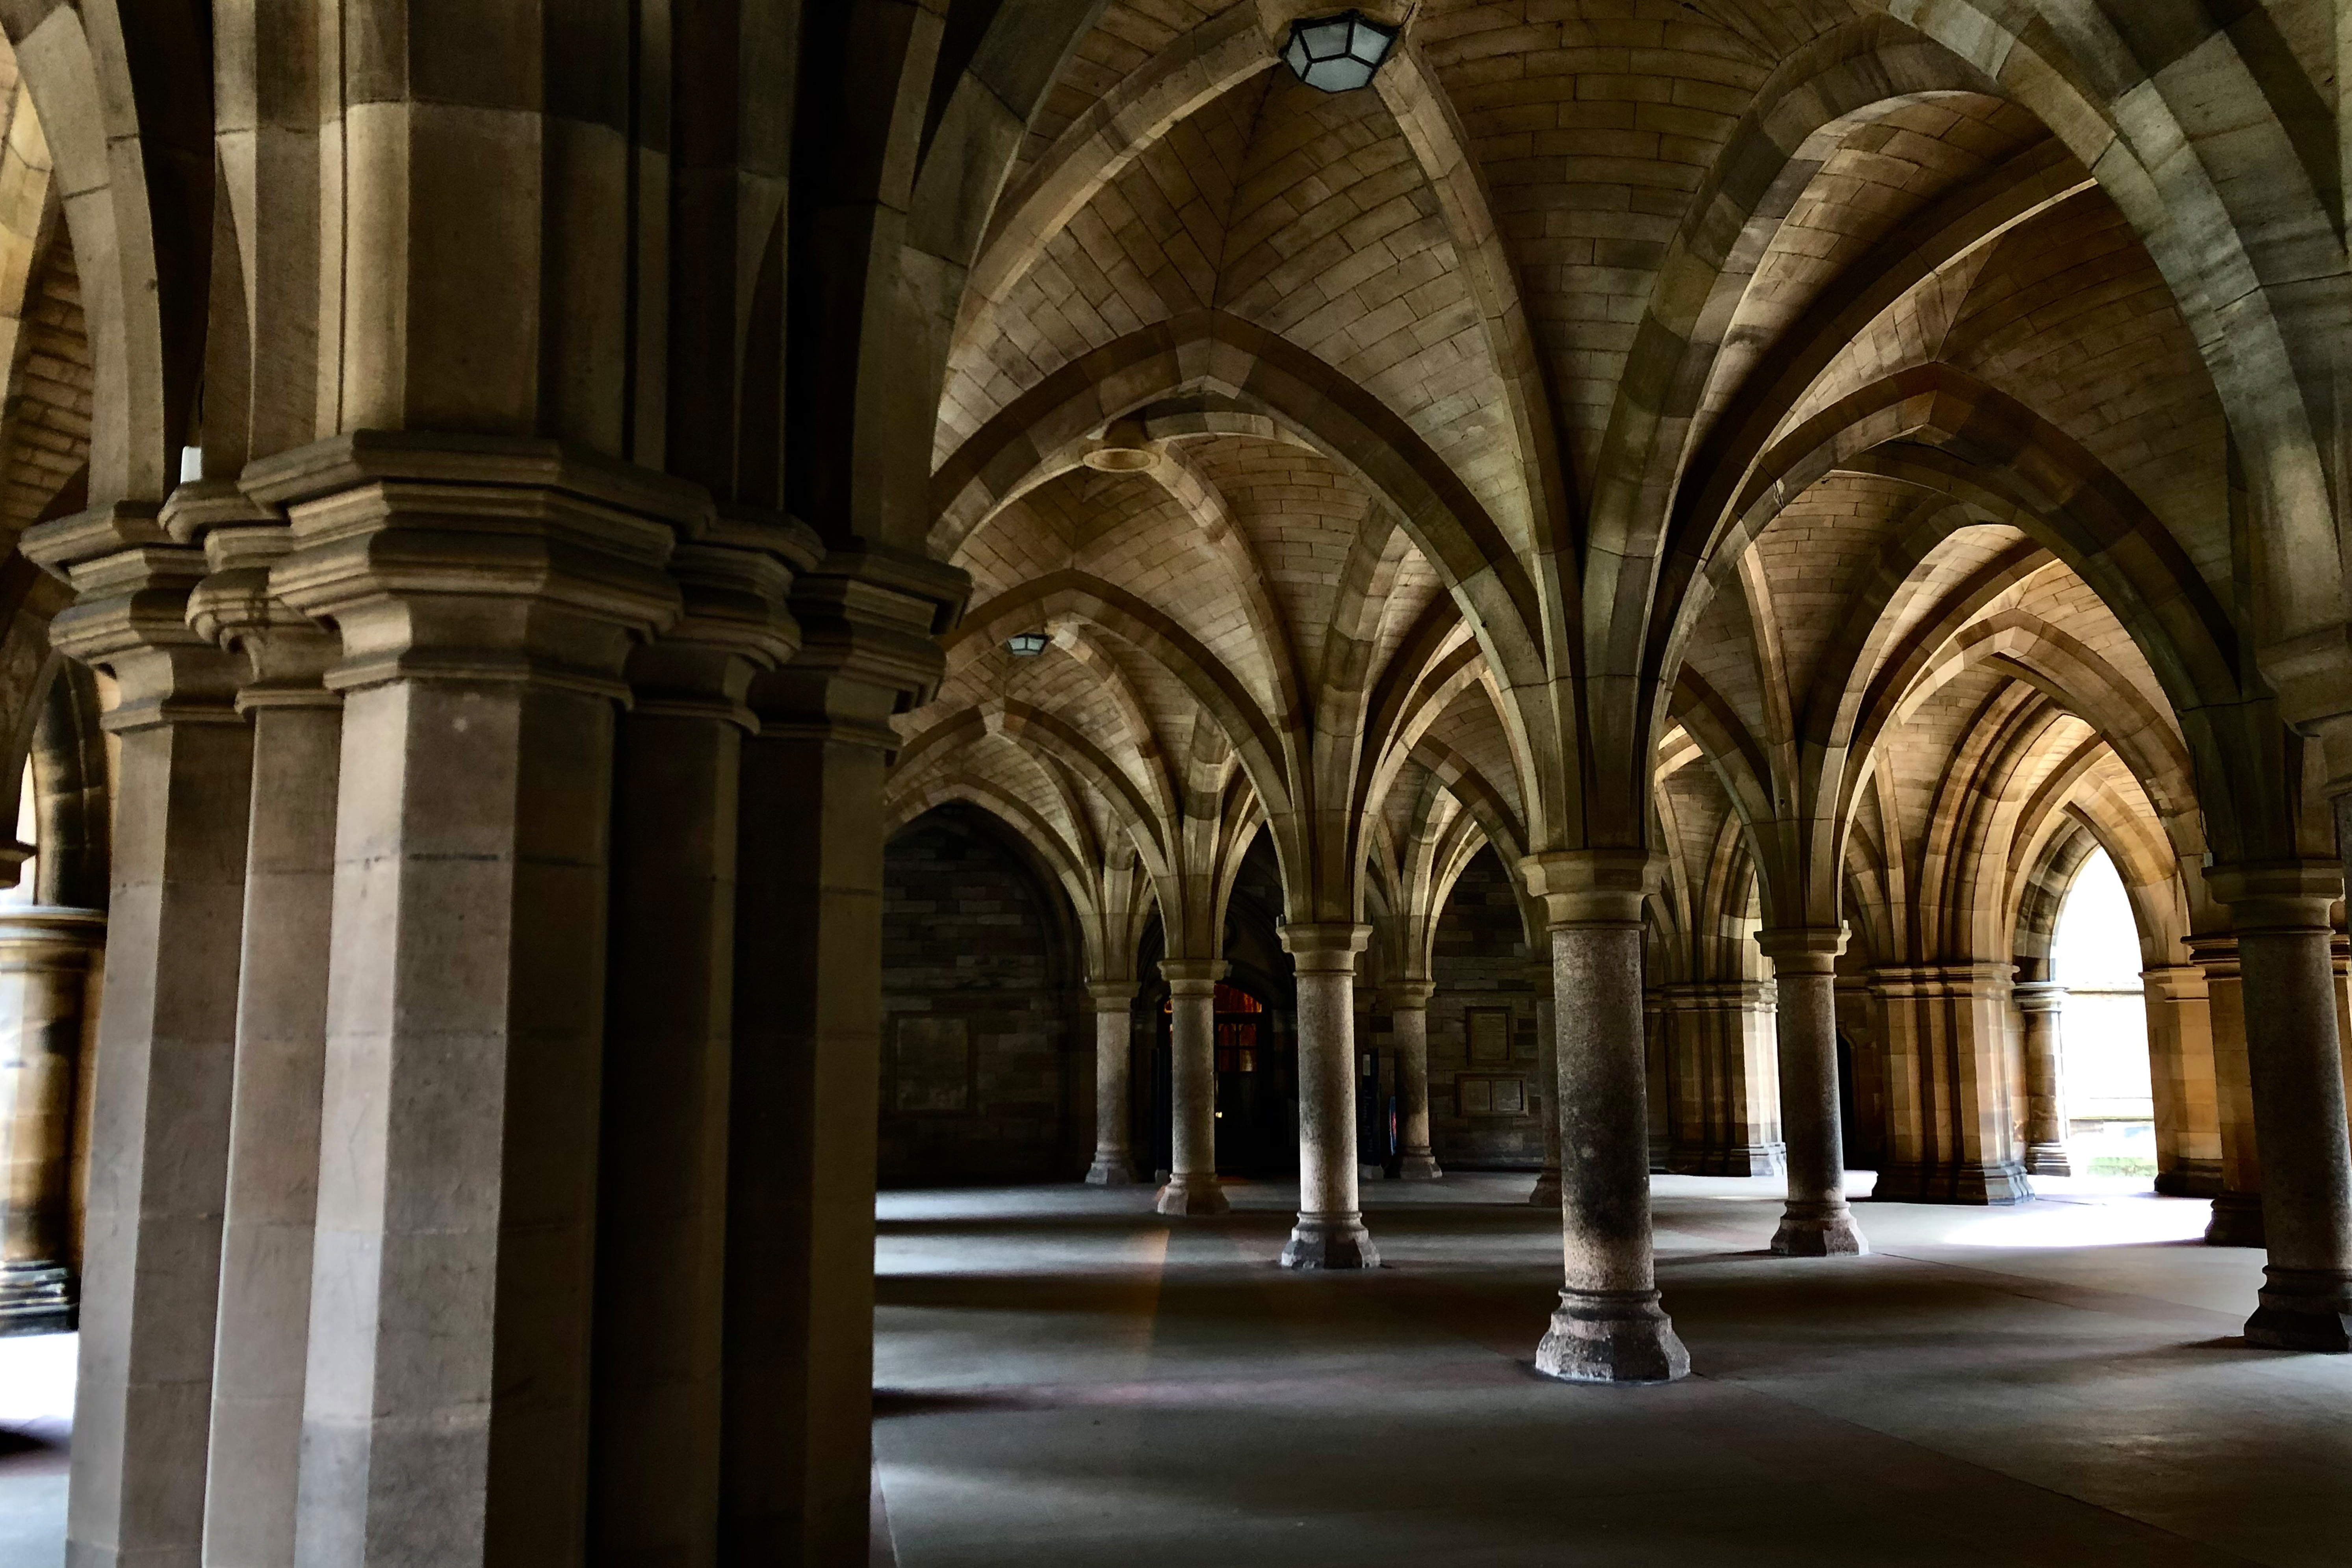 Photo of the inside of an old building in Scotland. Massive arches and pillars fill the room.